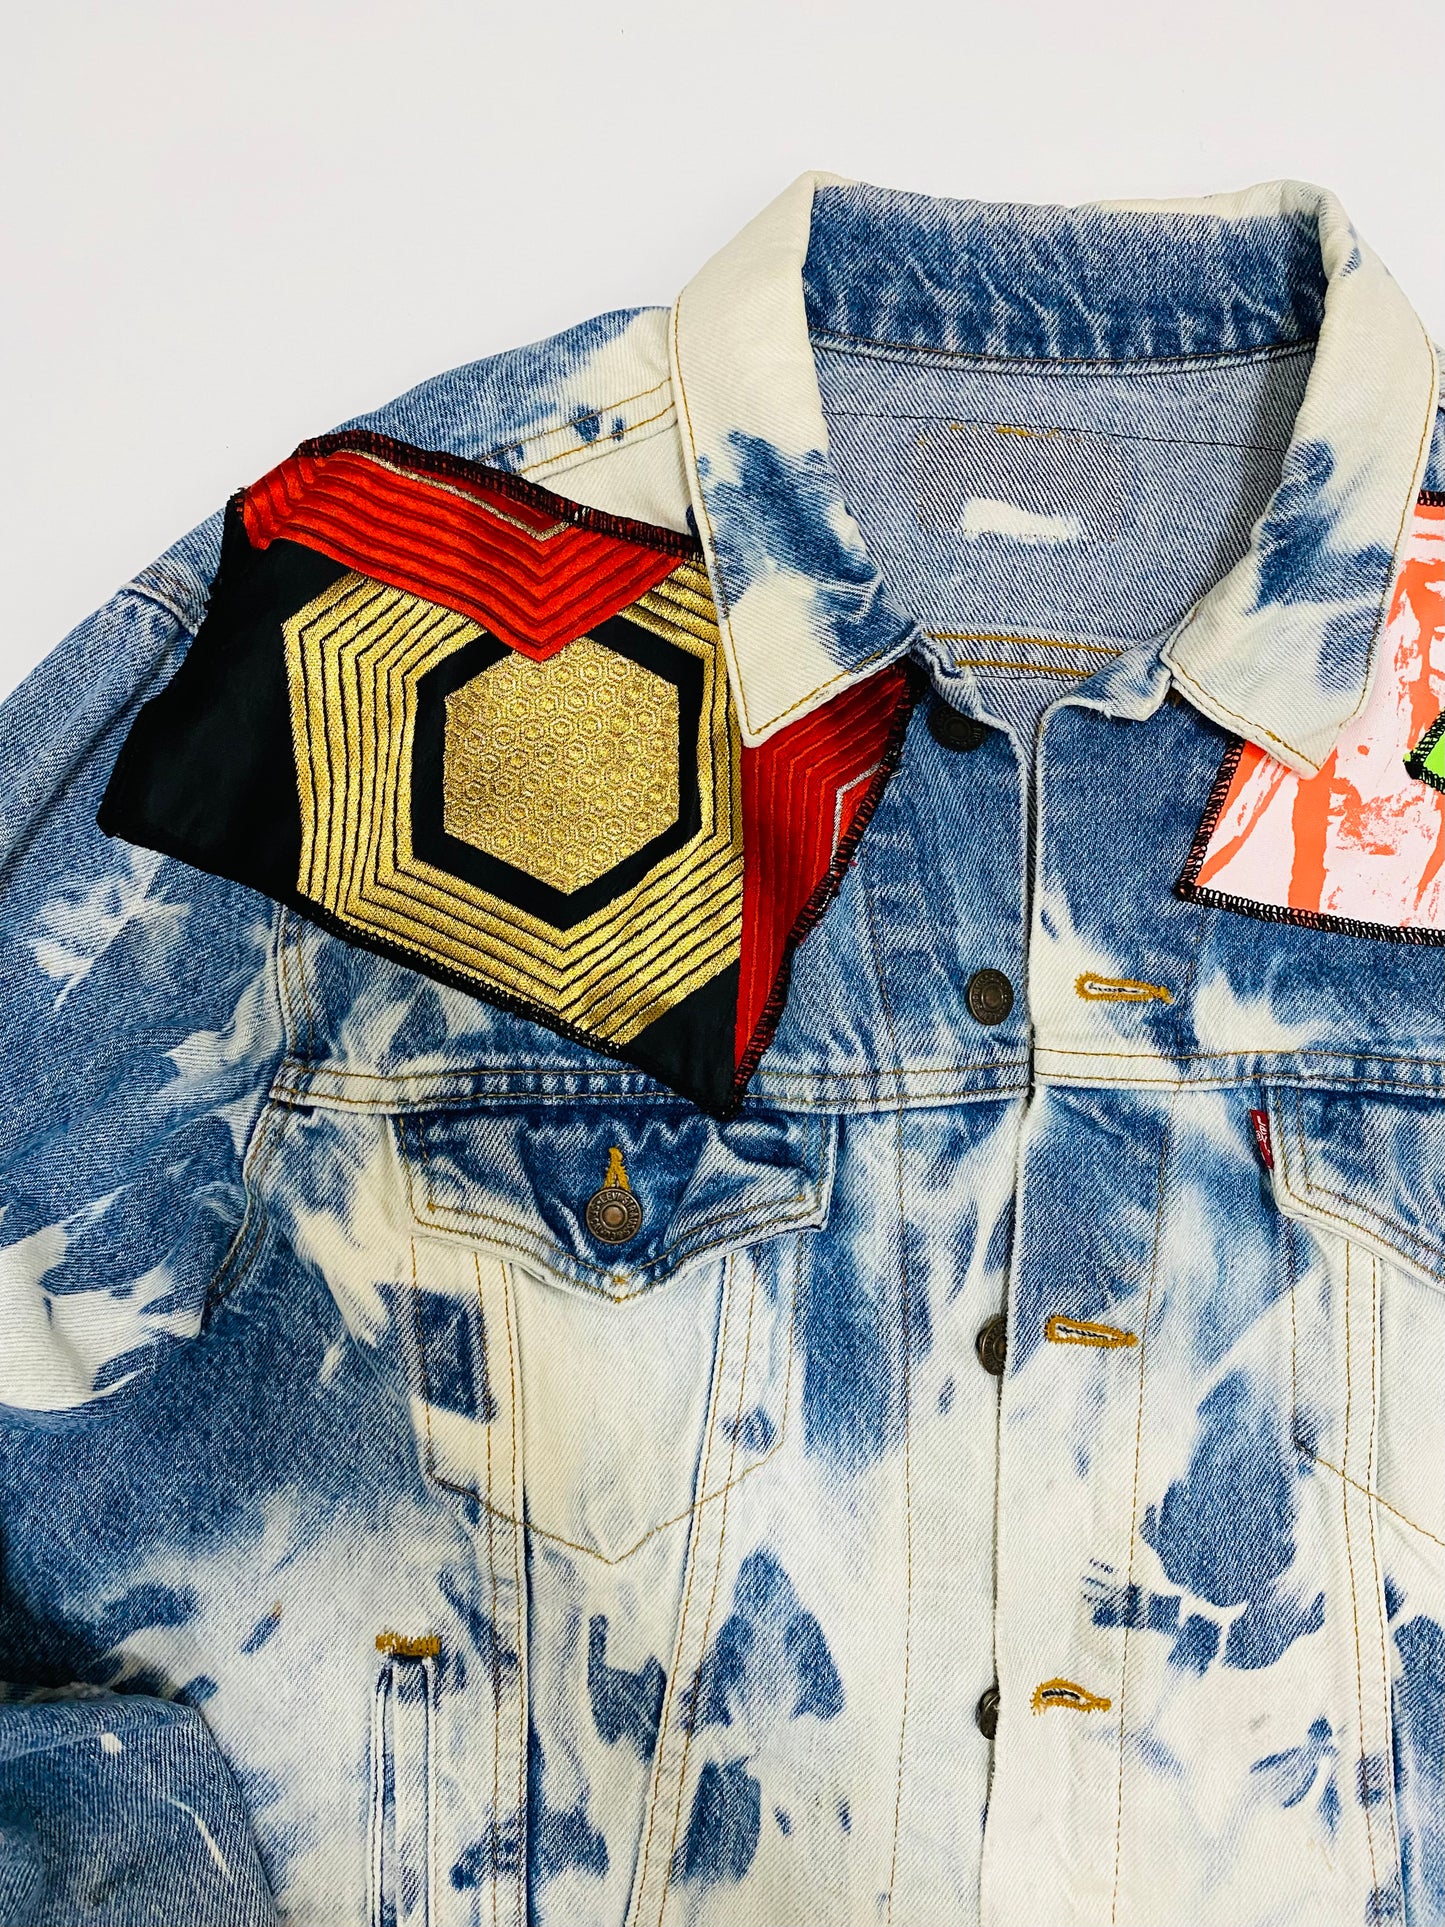 "Metallica" Bespoke Hypebeast Japanese Japan Vintage Beached Levi's Blue Handmade Custom One and Only One Cote Mer Upcycle Street Fashion Embroidered Embroidery Kimono Obi Boro Style Band Rap Tee T Shirt Patchwork Remake Denim Jacket ( Size : L - XL )